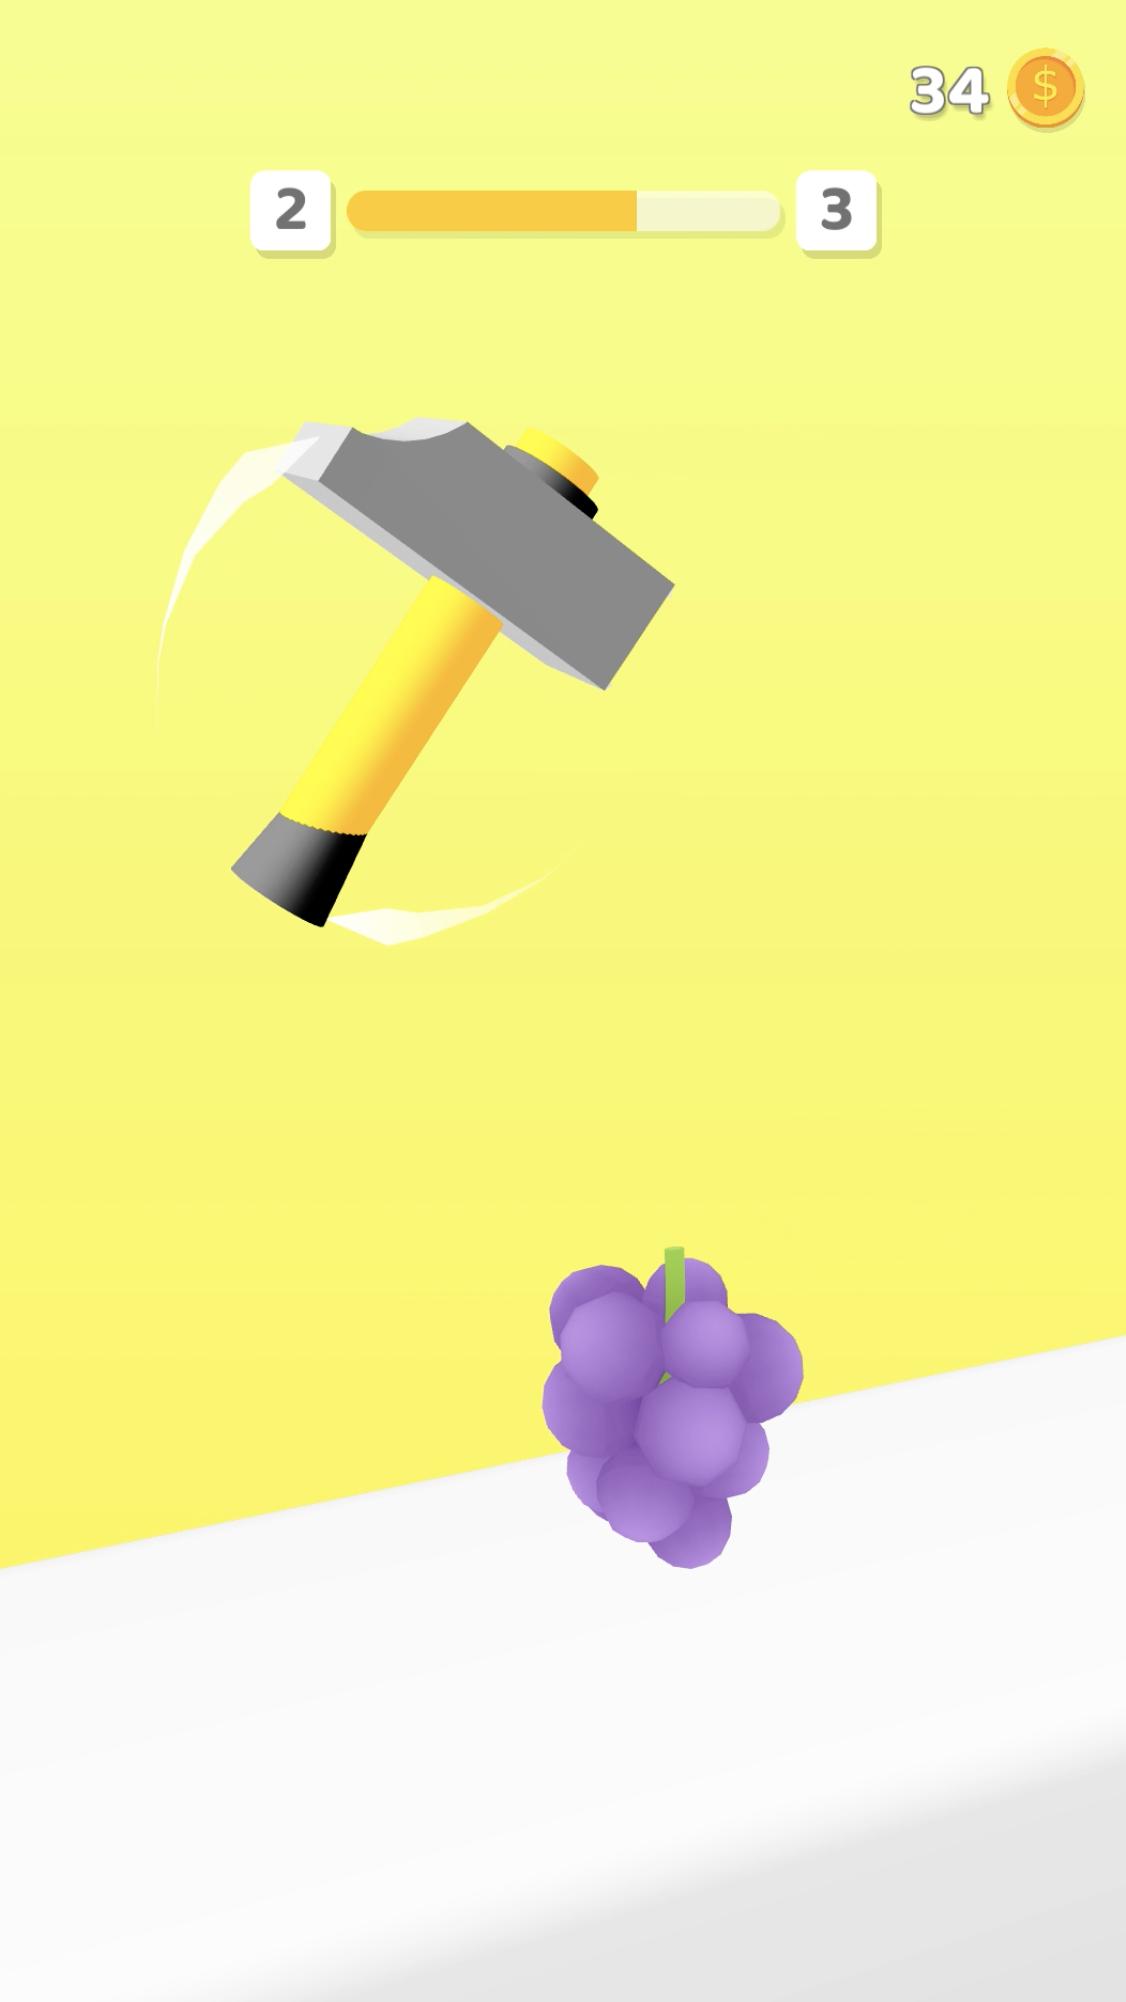 Hammer Spin for Android - APK Download